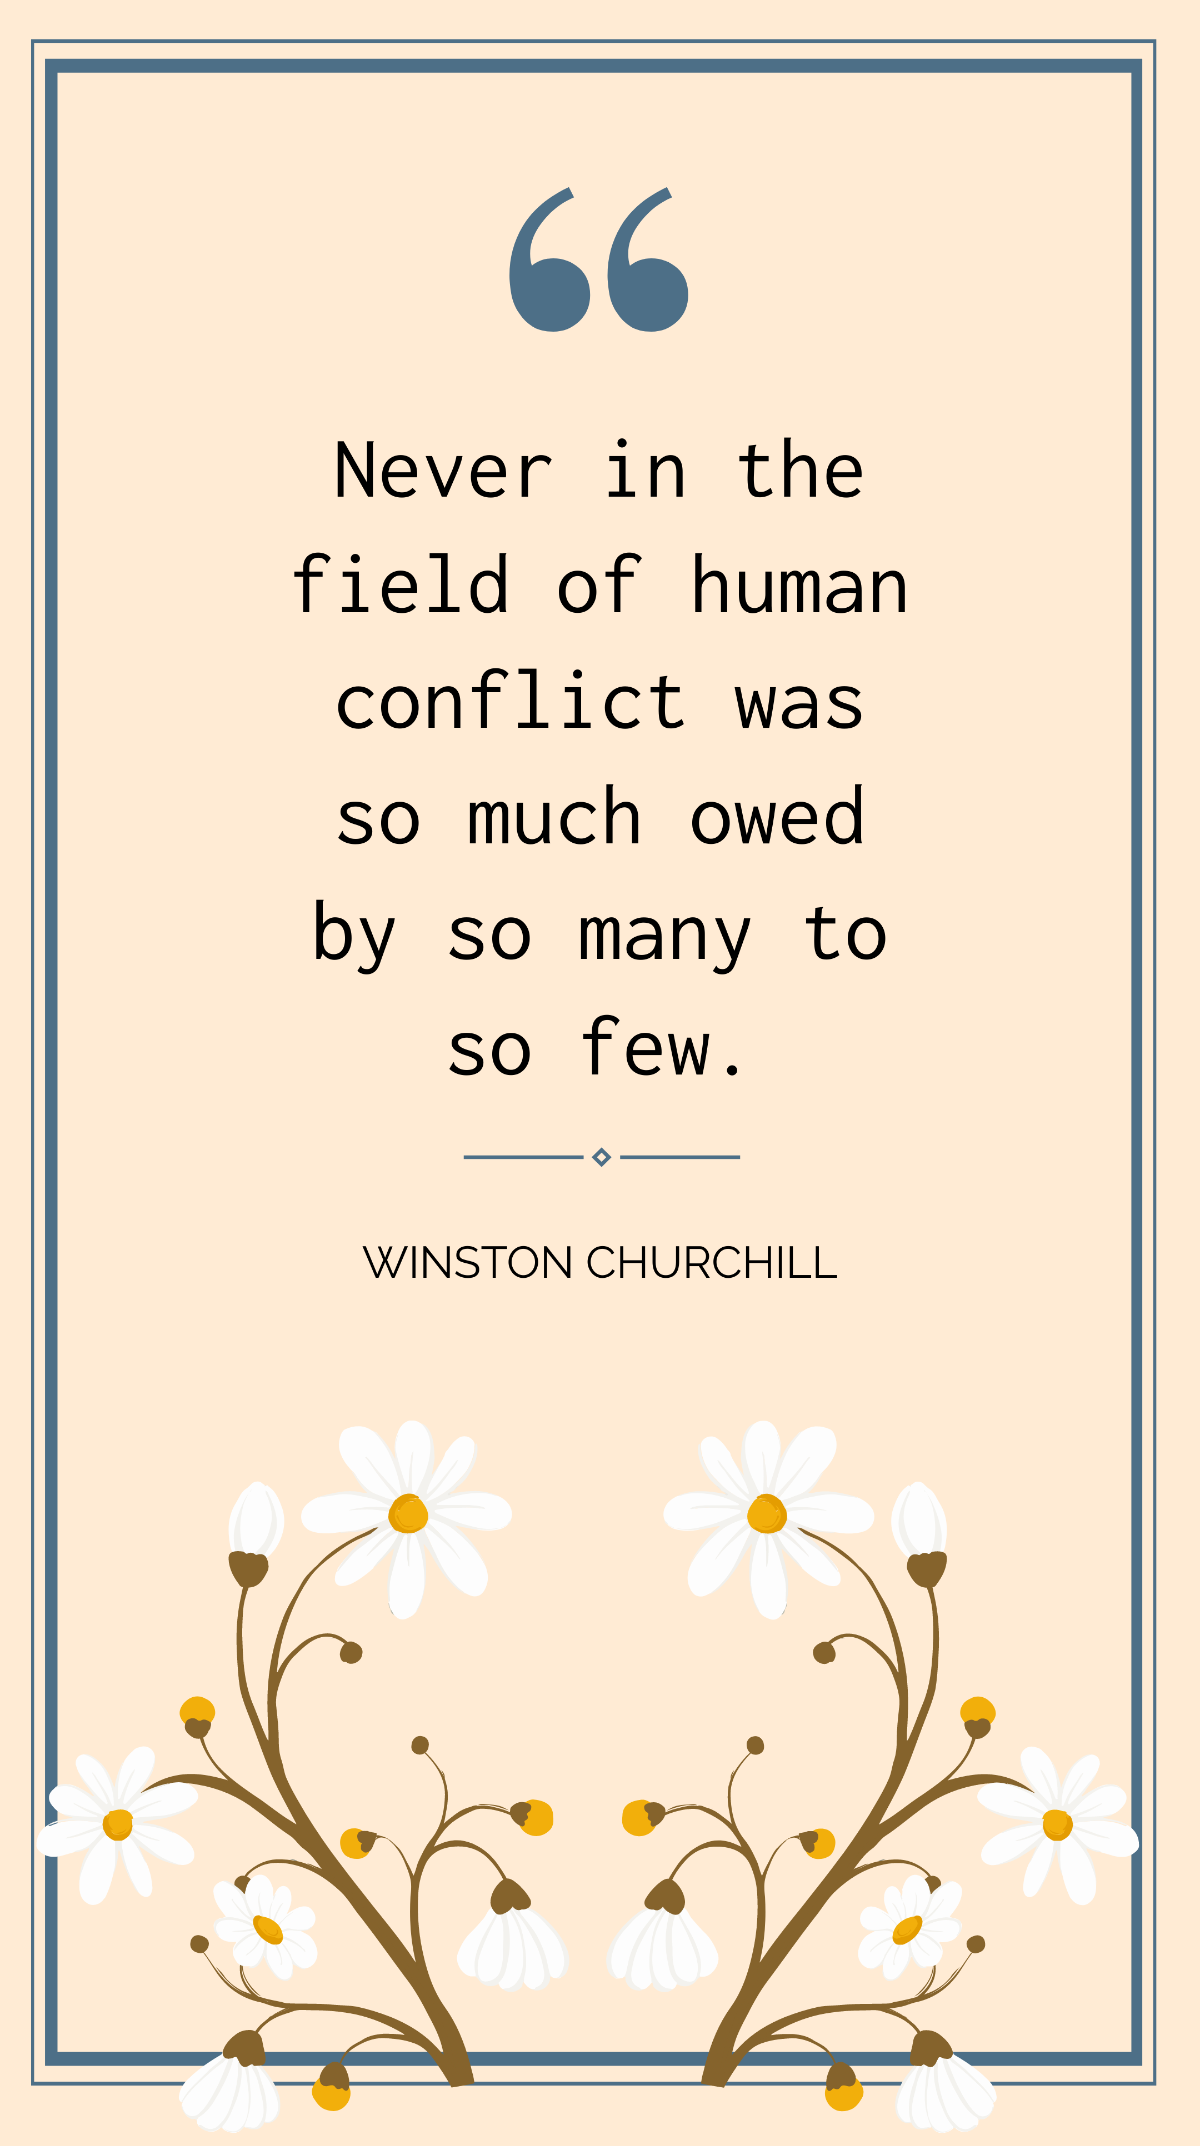 Winston Churchill - Never in the field of human conflict was so much owed by so many to so few 